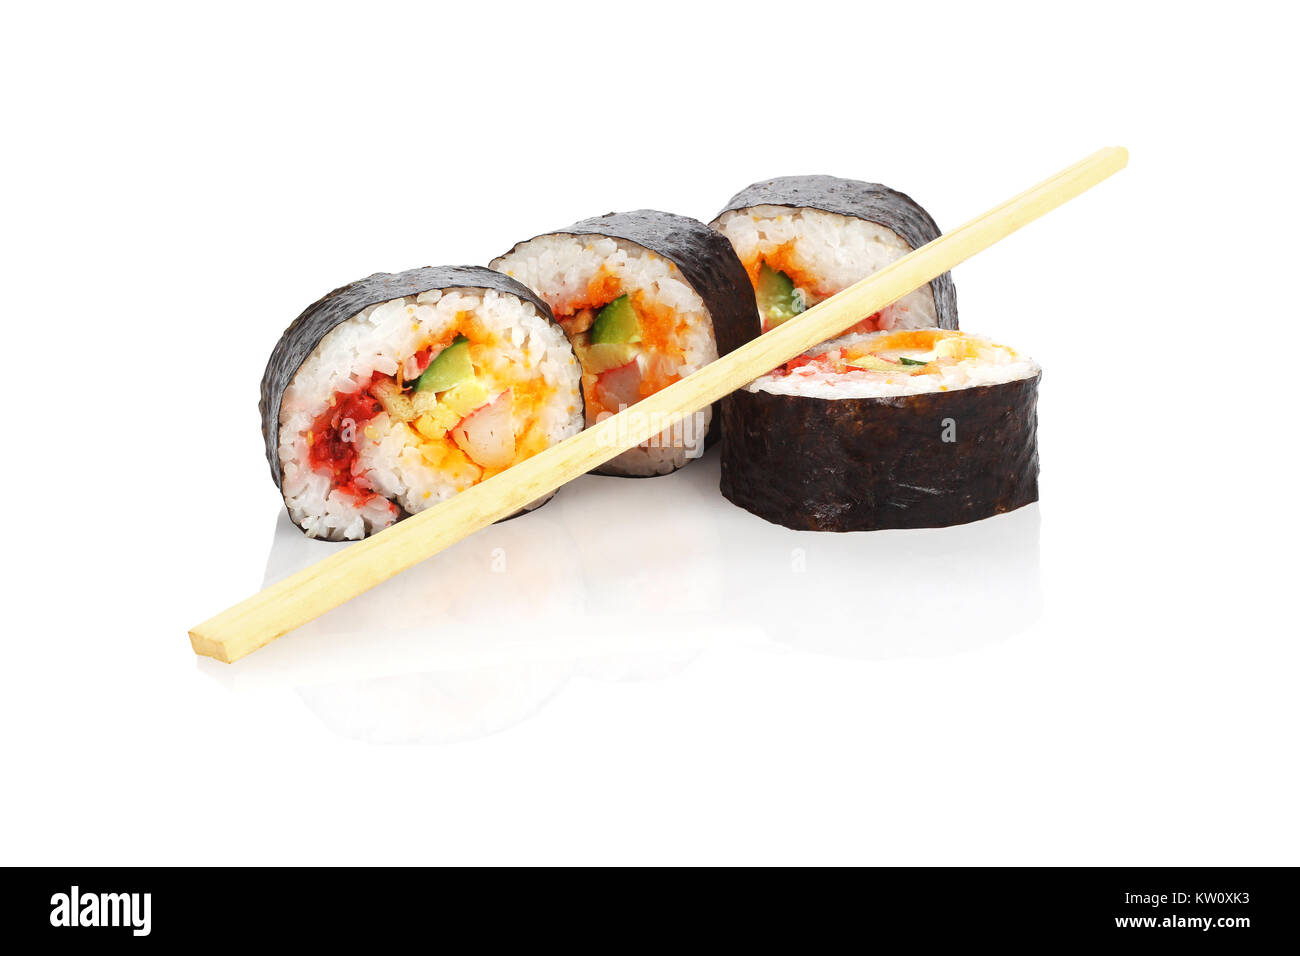 Cut Sushi Rolls and Disposable Chopsticks on White Background Stock Photo